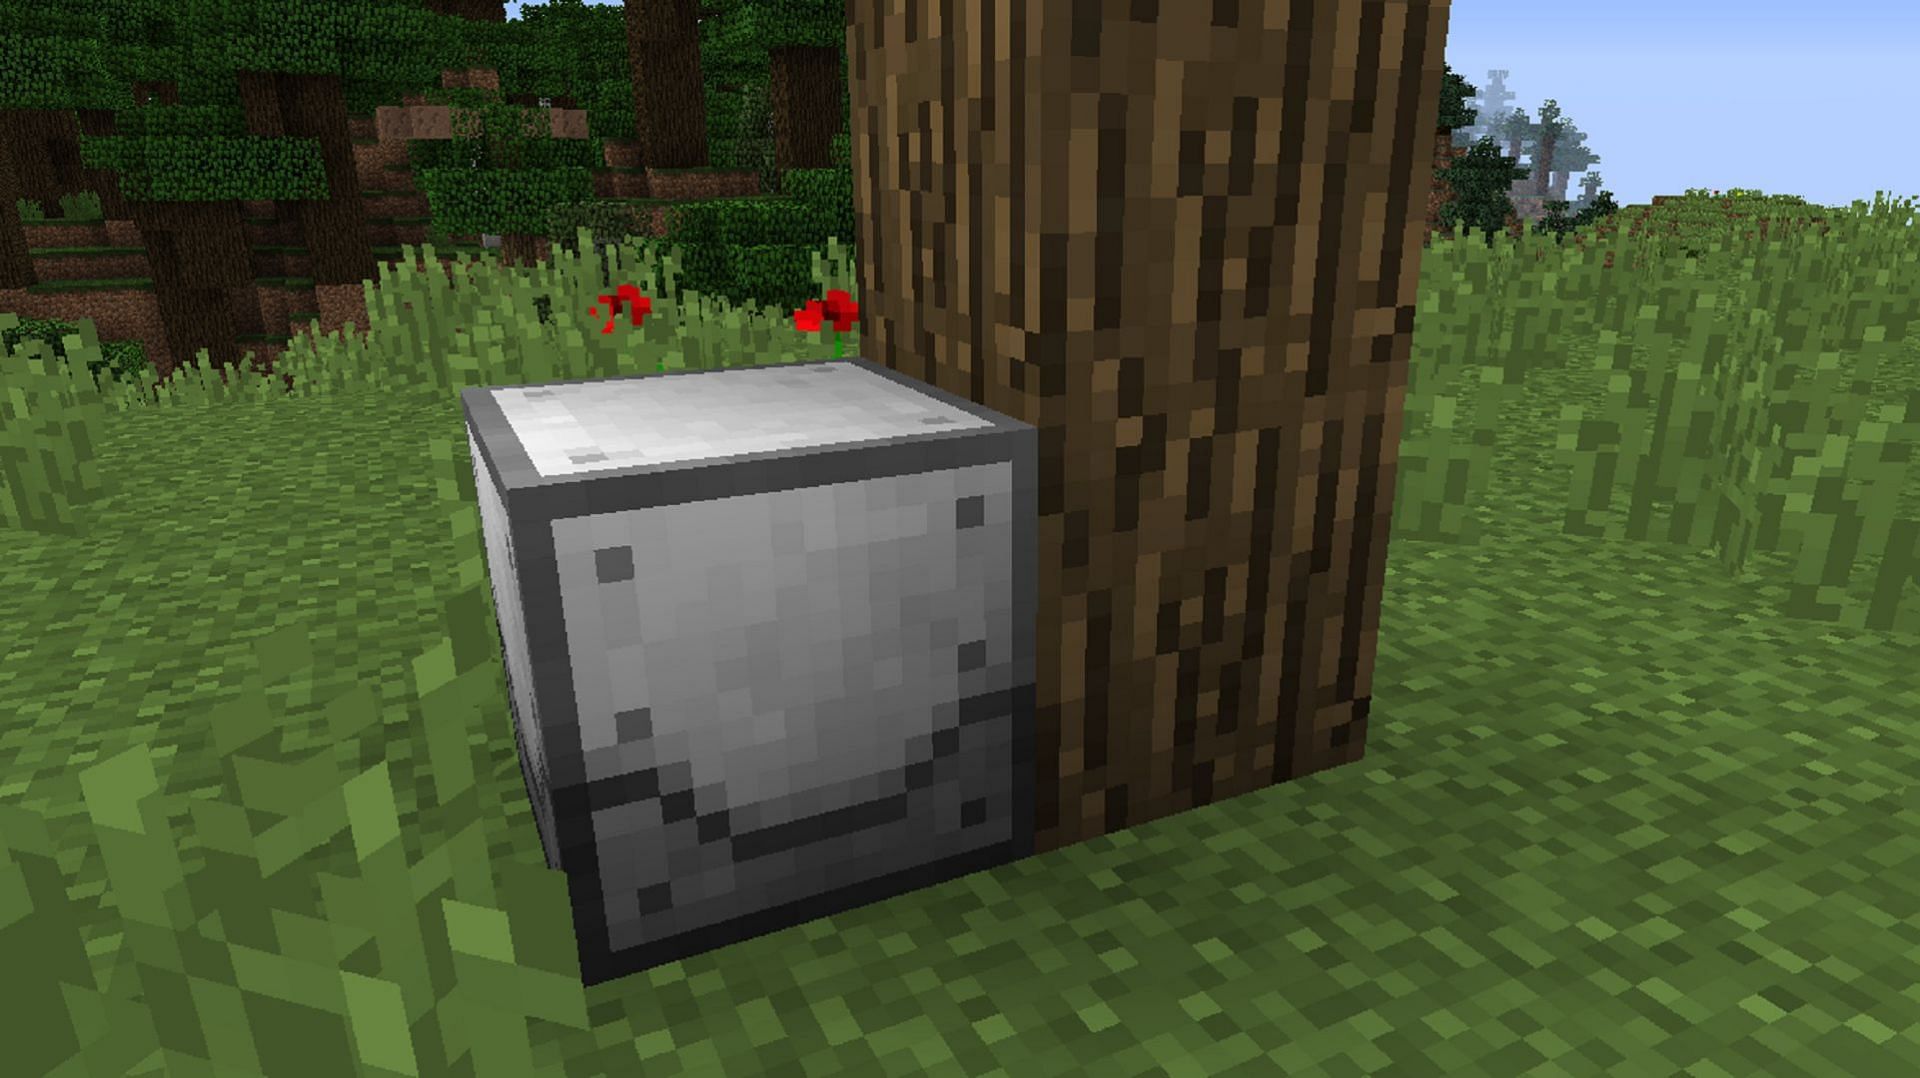 A Tree Fluid Extractor for making latex in the Minecraft mod Industrial Foregoing. (Image via Buuz135/CurseForge)